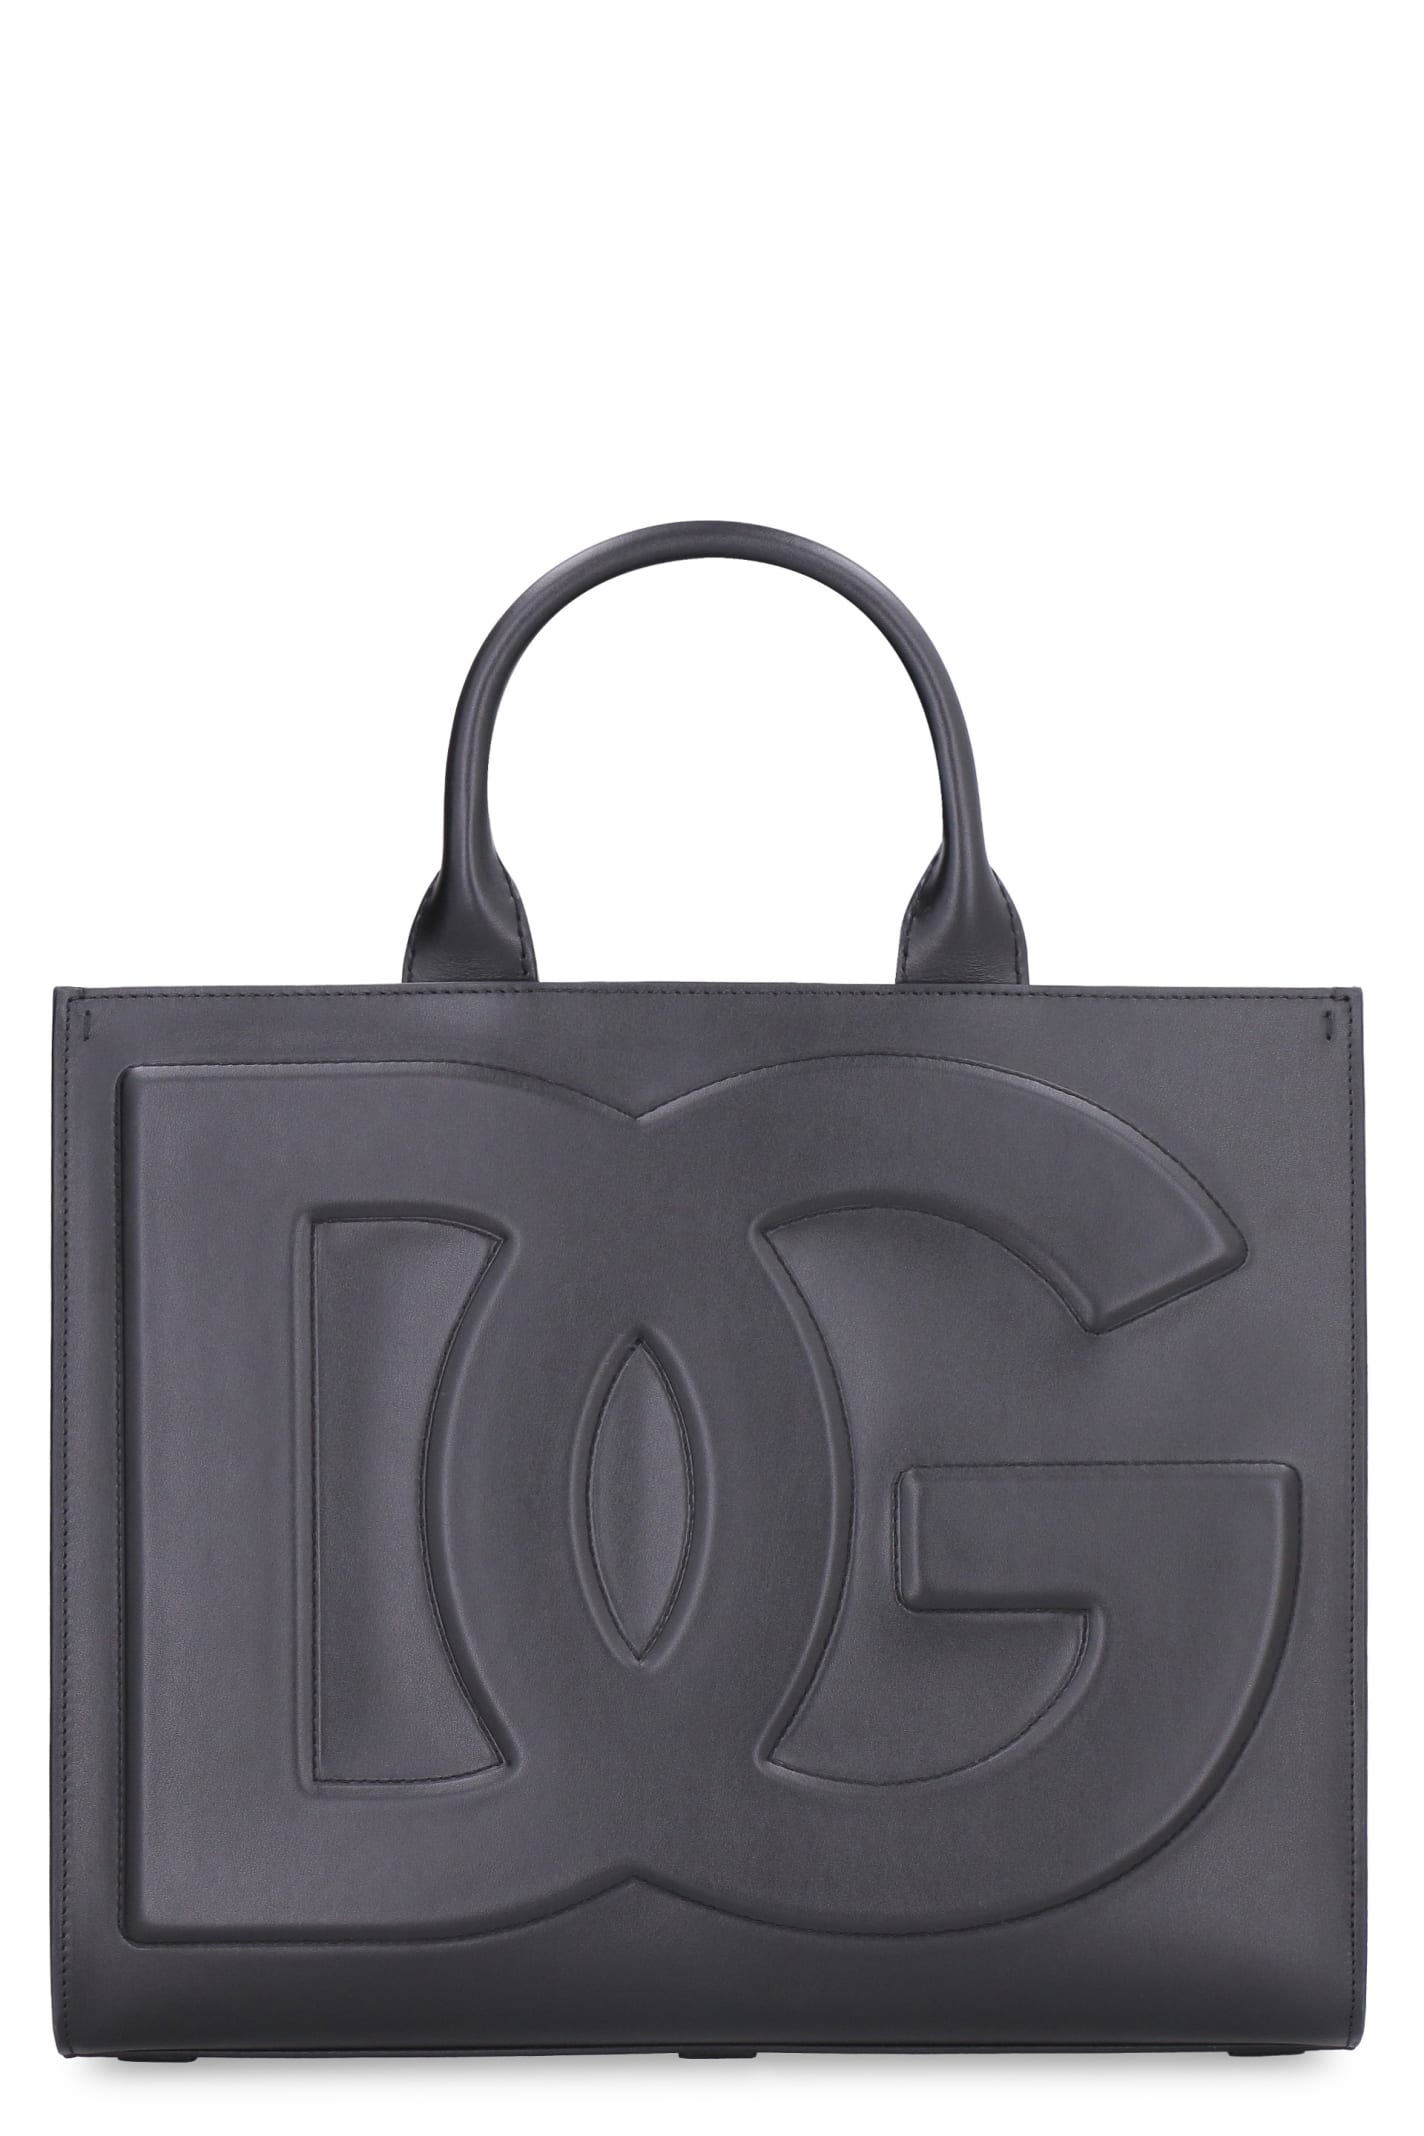 DOLCE & GABBANA DG DAILY LEATHER TOTE